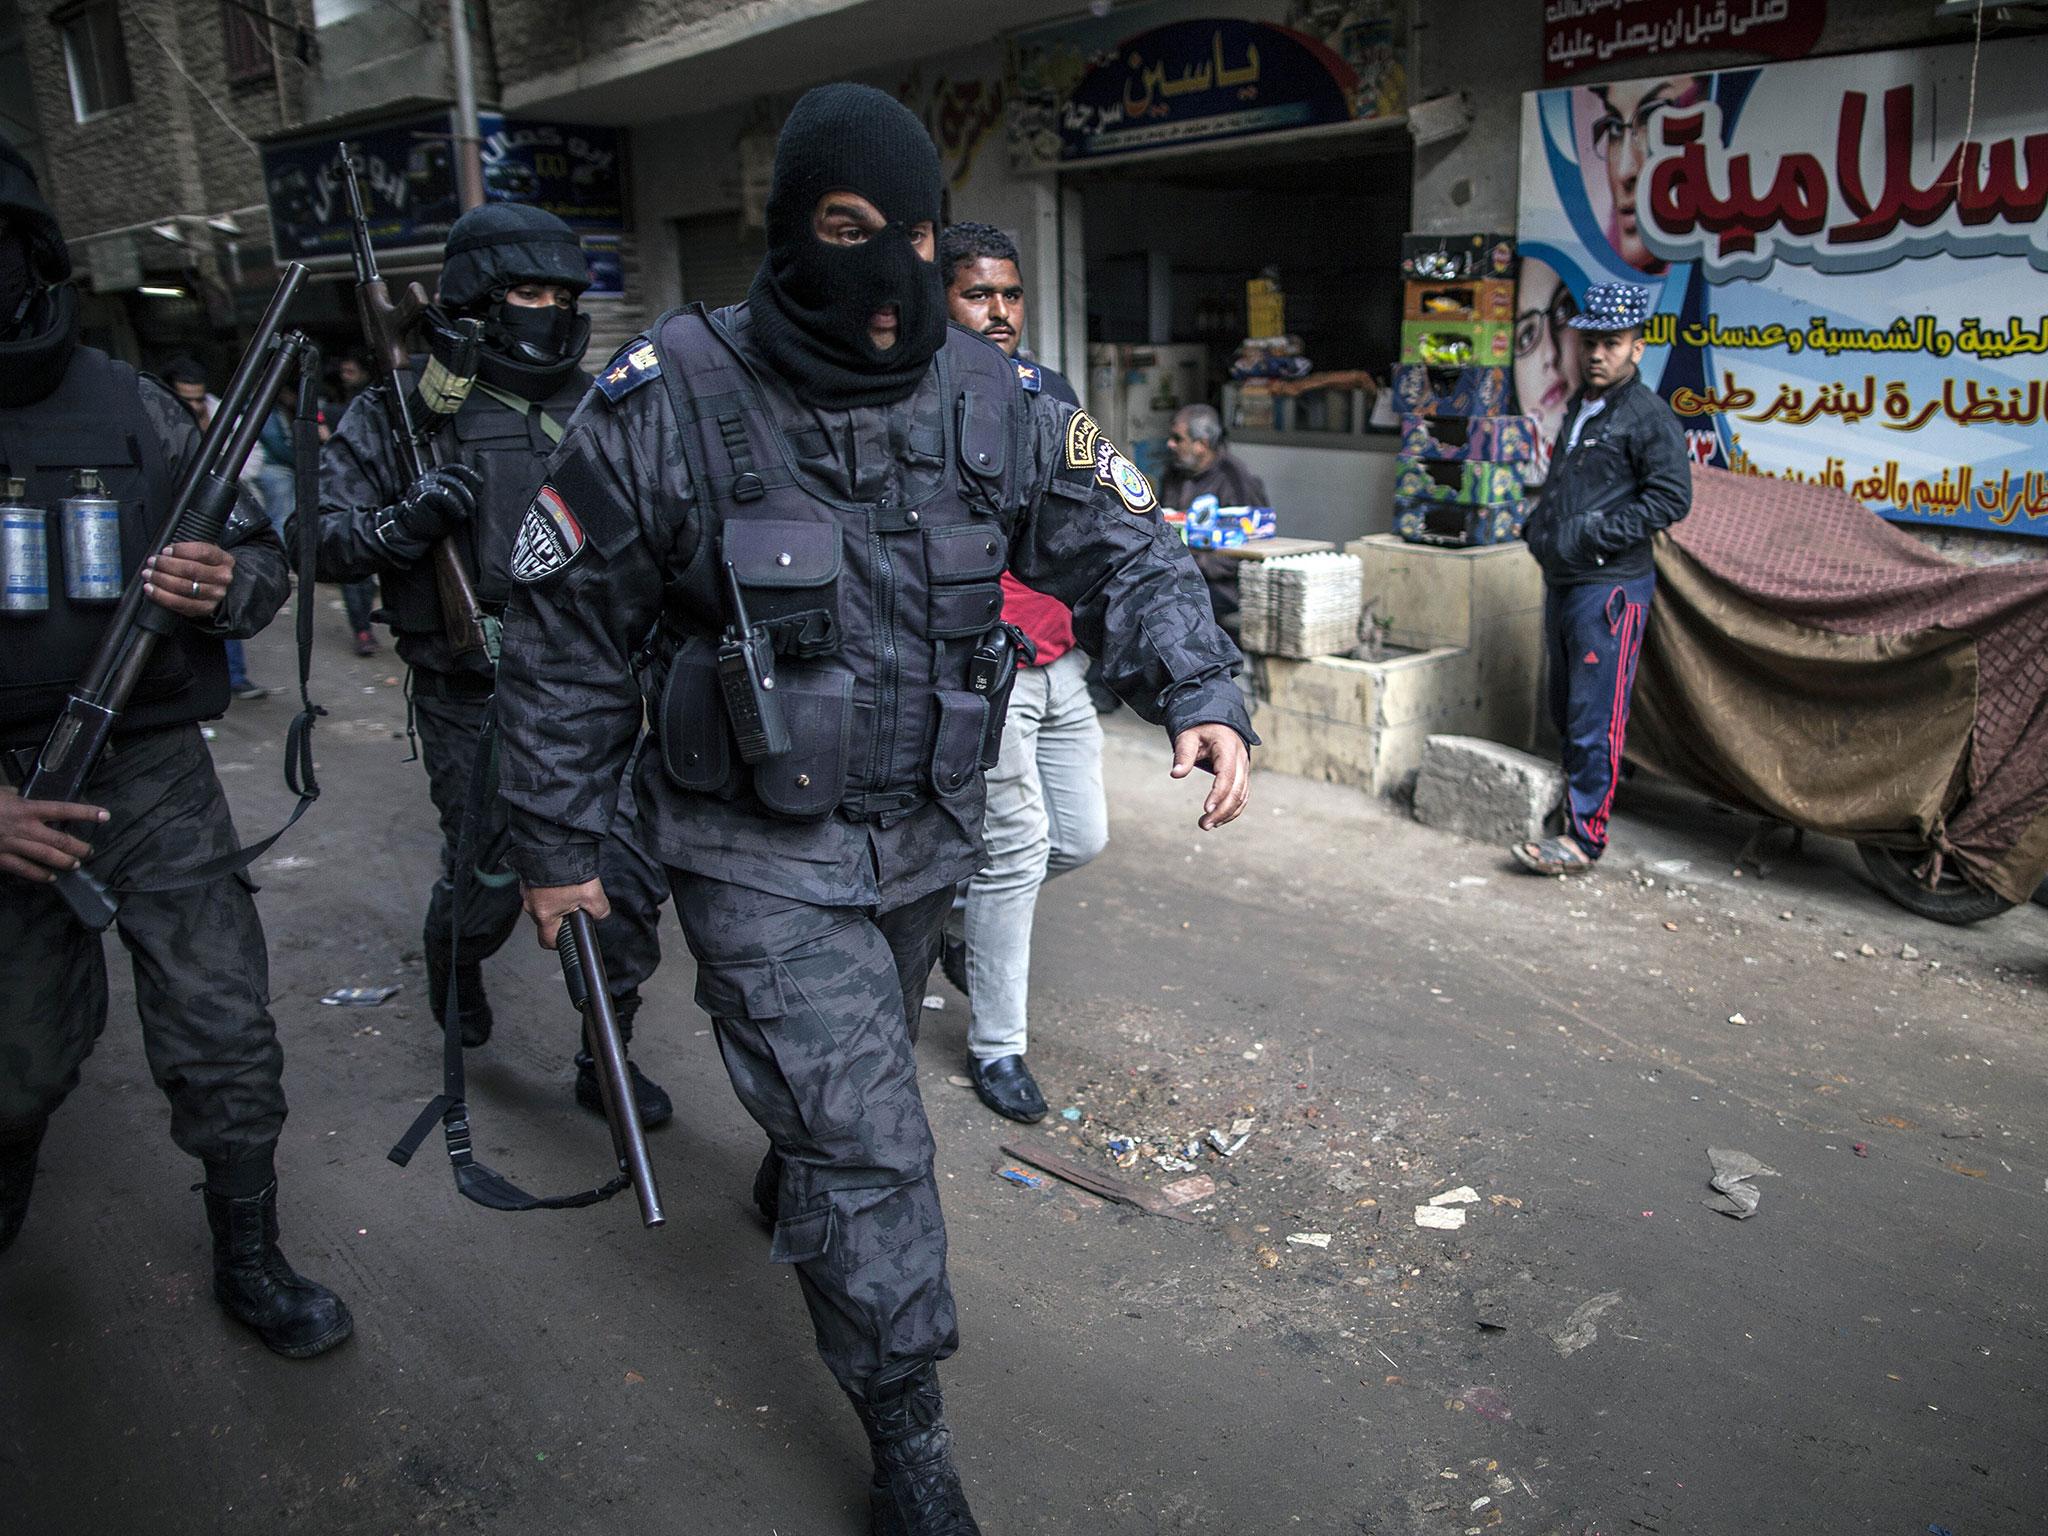 Members of the Egyptian police special forces patrol streets in al-Haram neighbourhood in the southern Cairo Giza district on 25 January, 2016, in order to head off potential protests against President Abdel Fattah al-Sisi's government